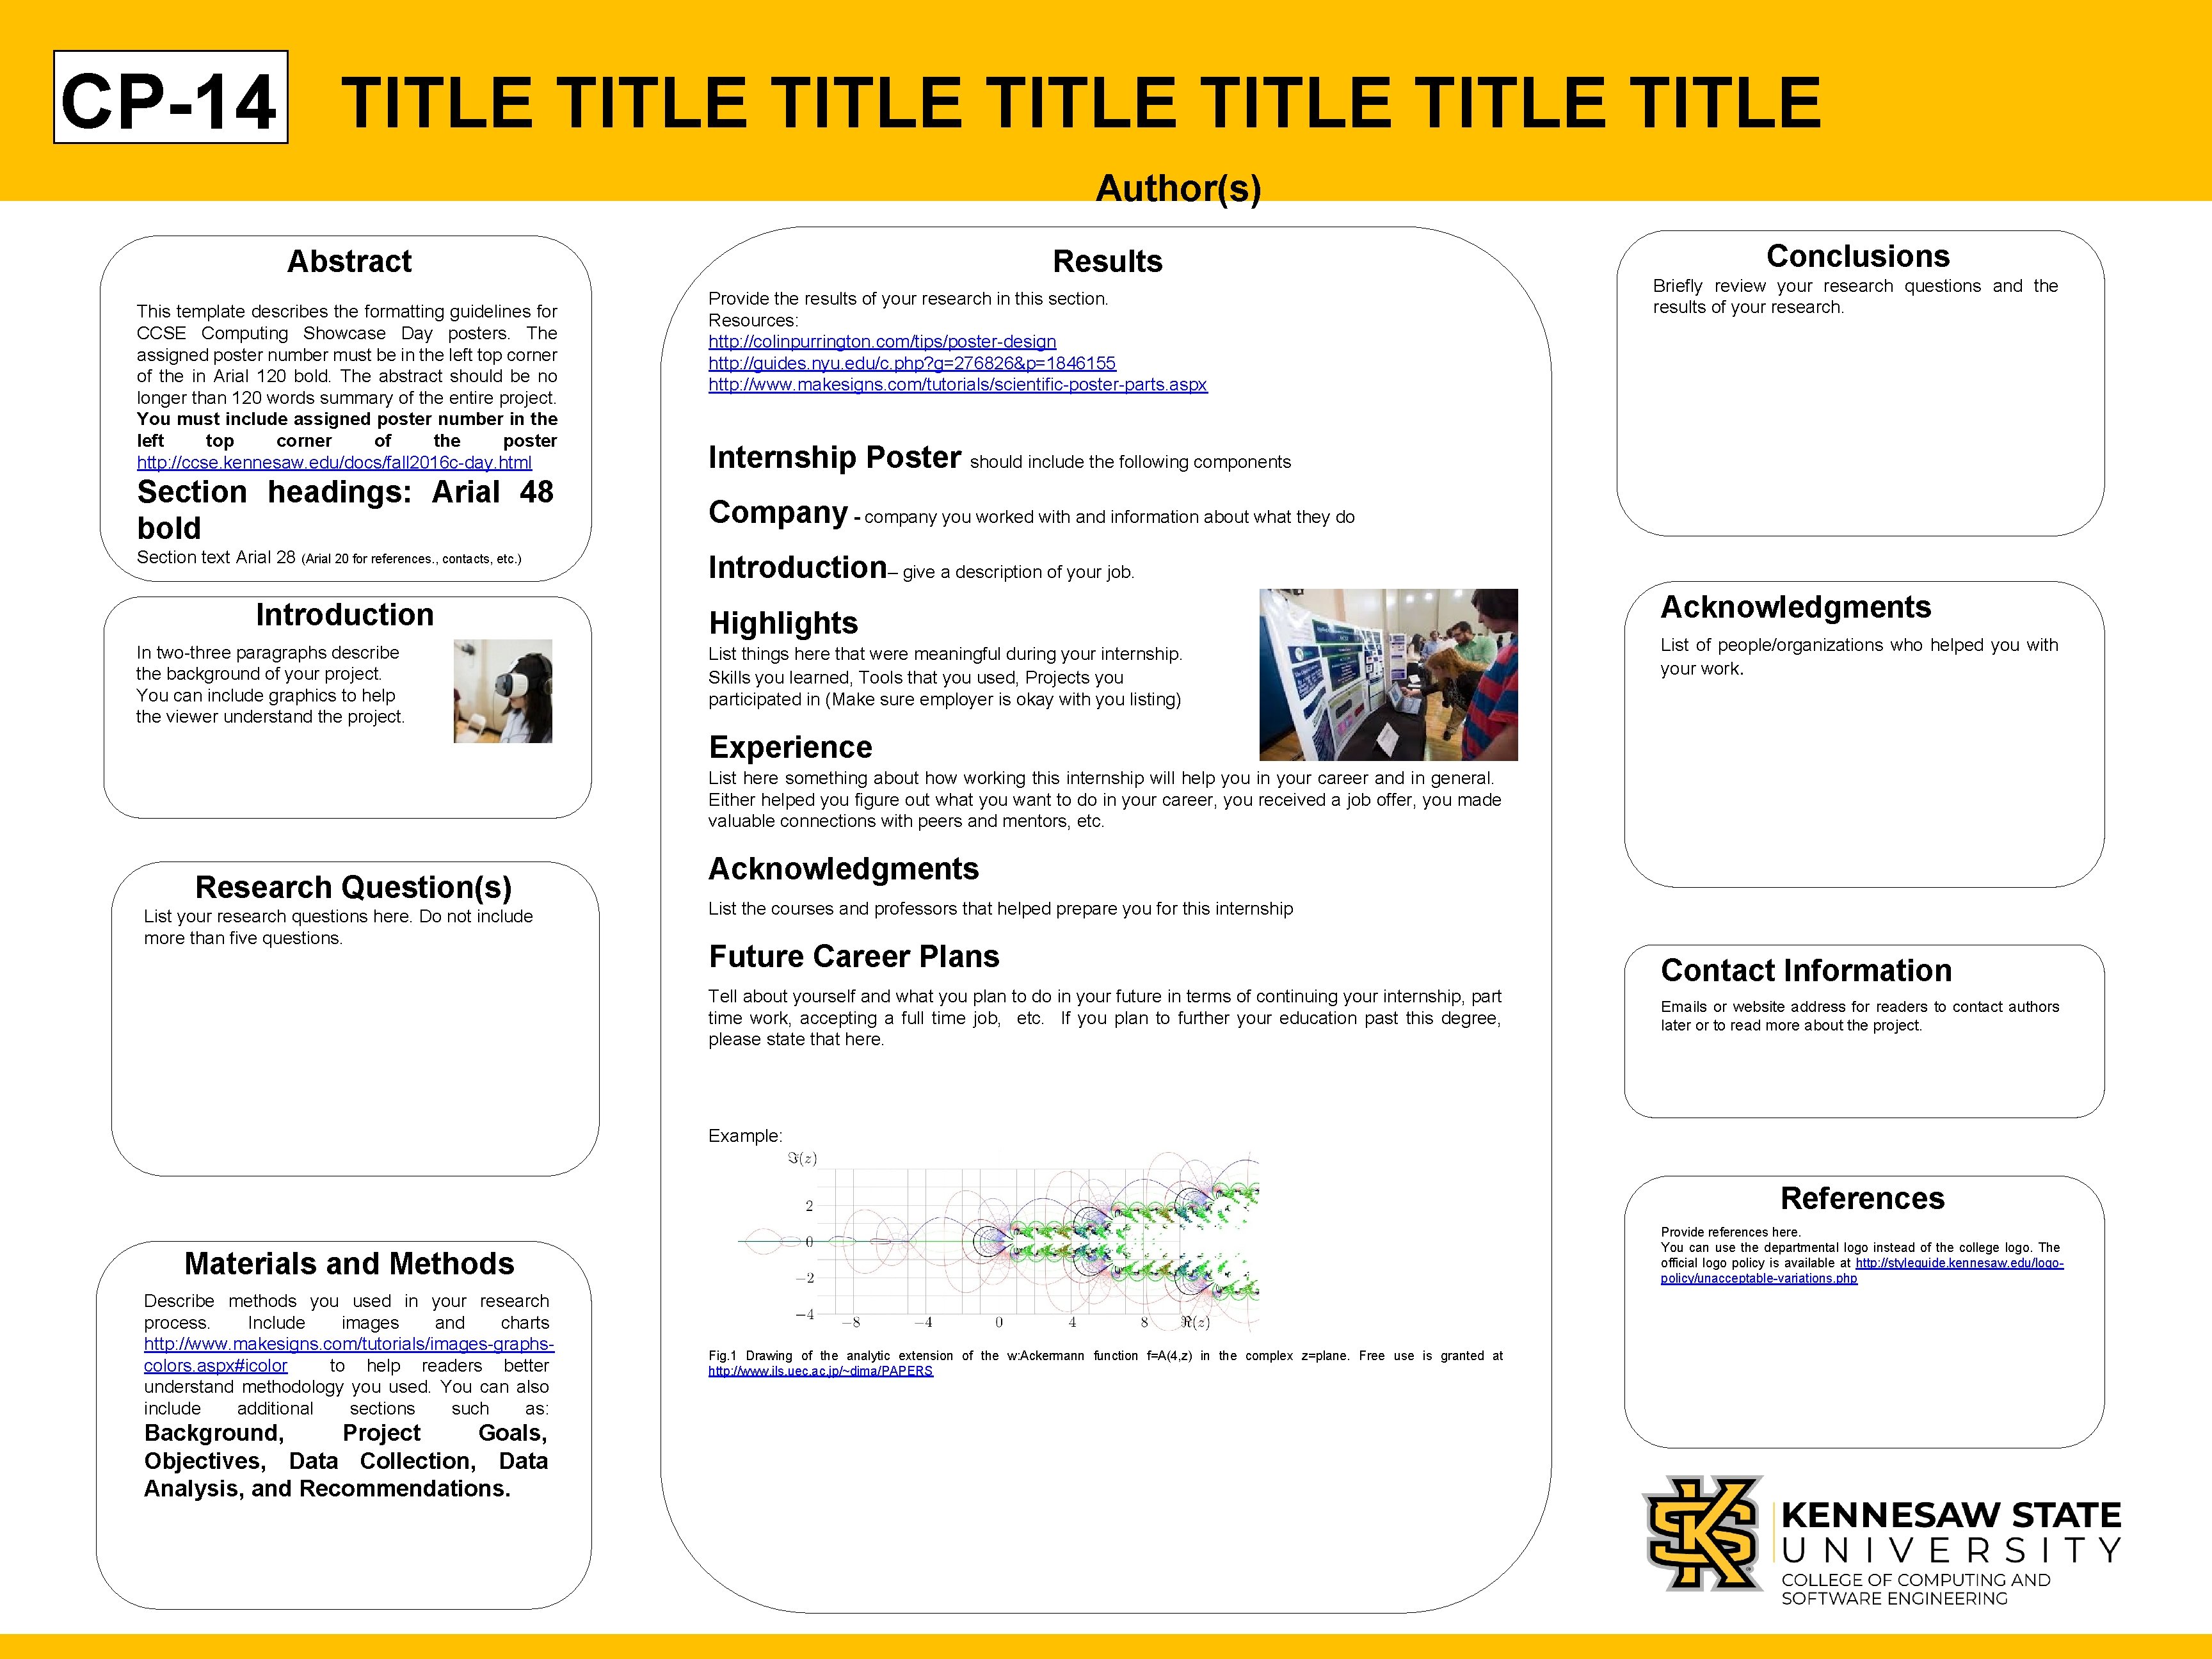 CP-14 TITLE TITLE Author(s) Abstract This template describes the formatting guidelines for CCSE Computing